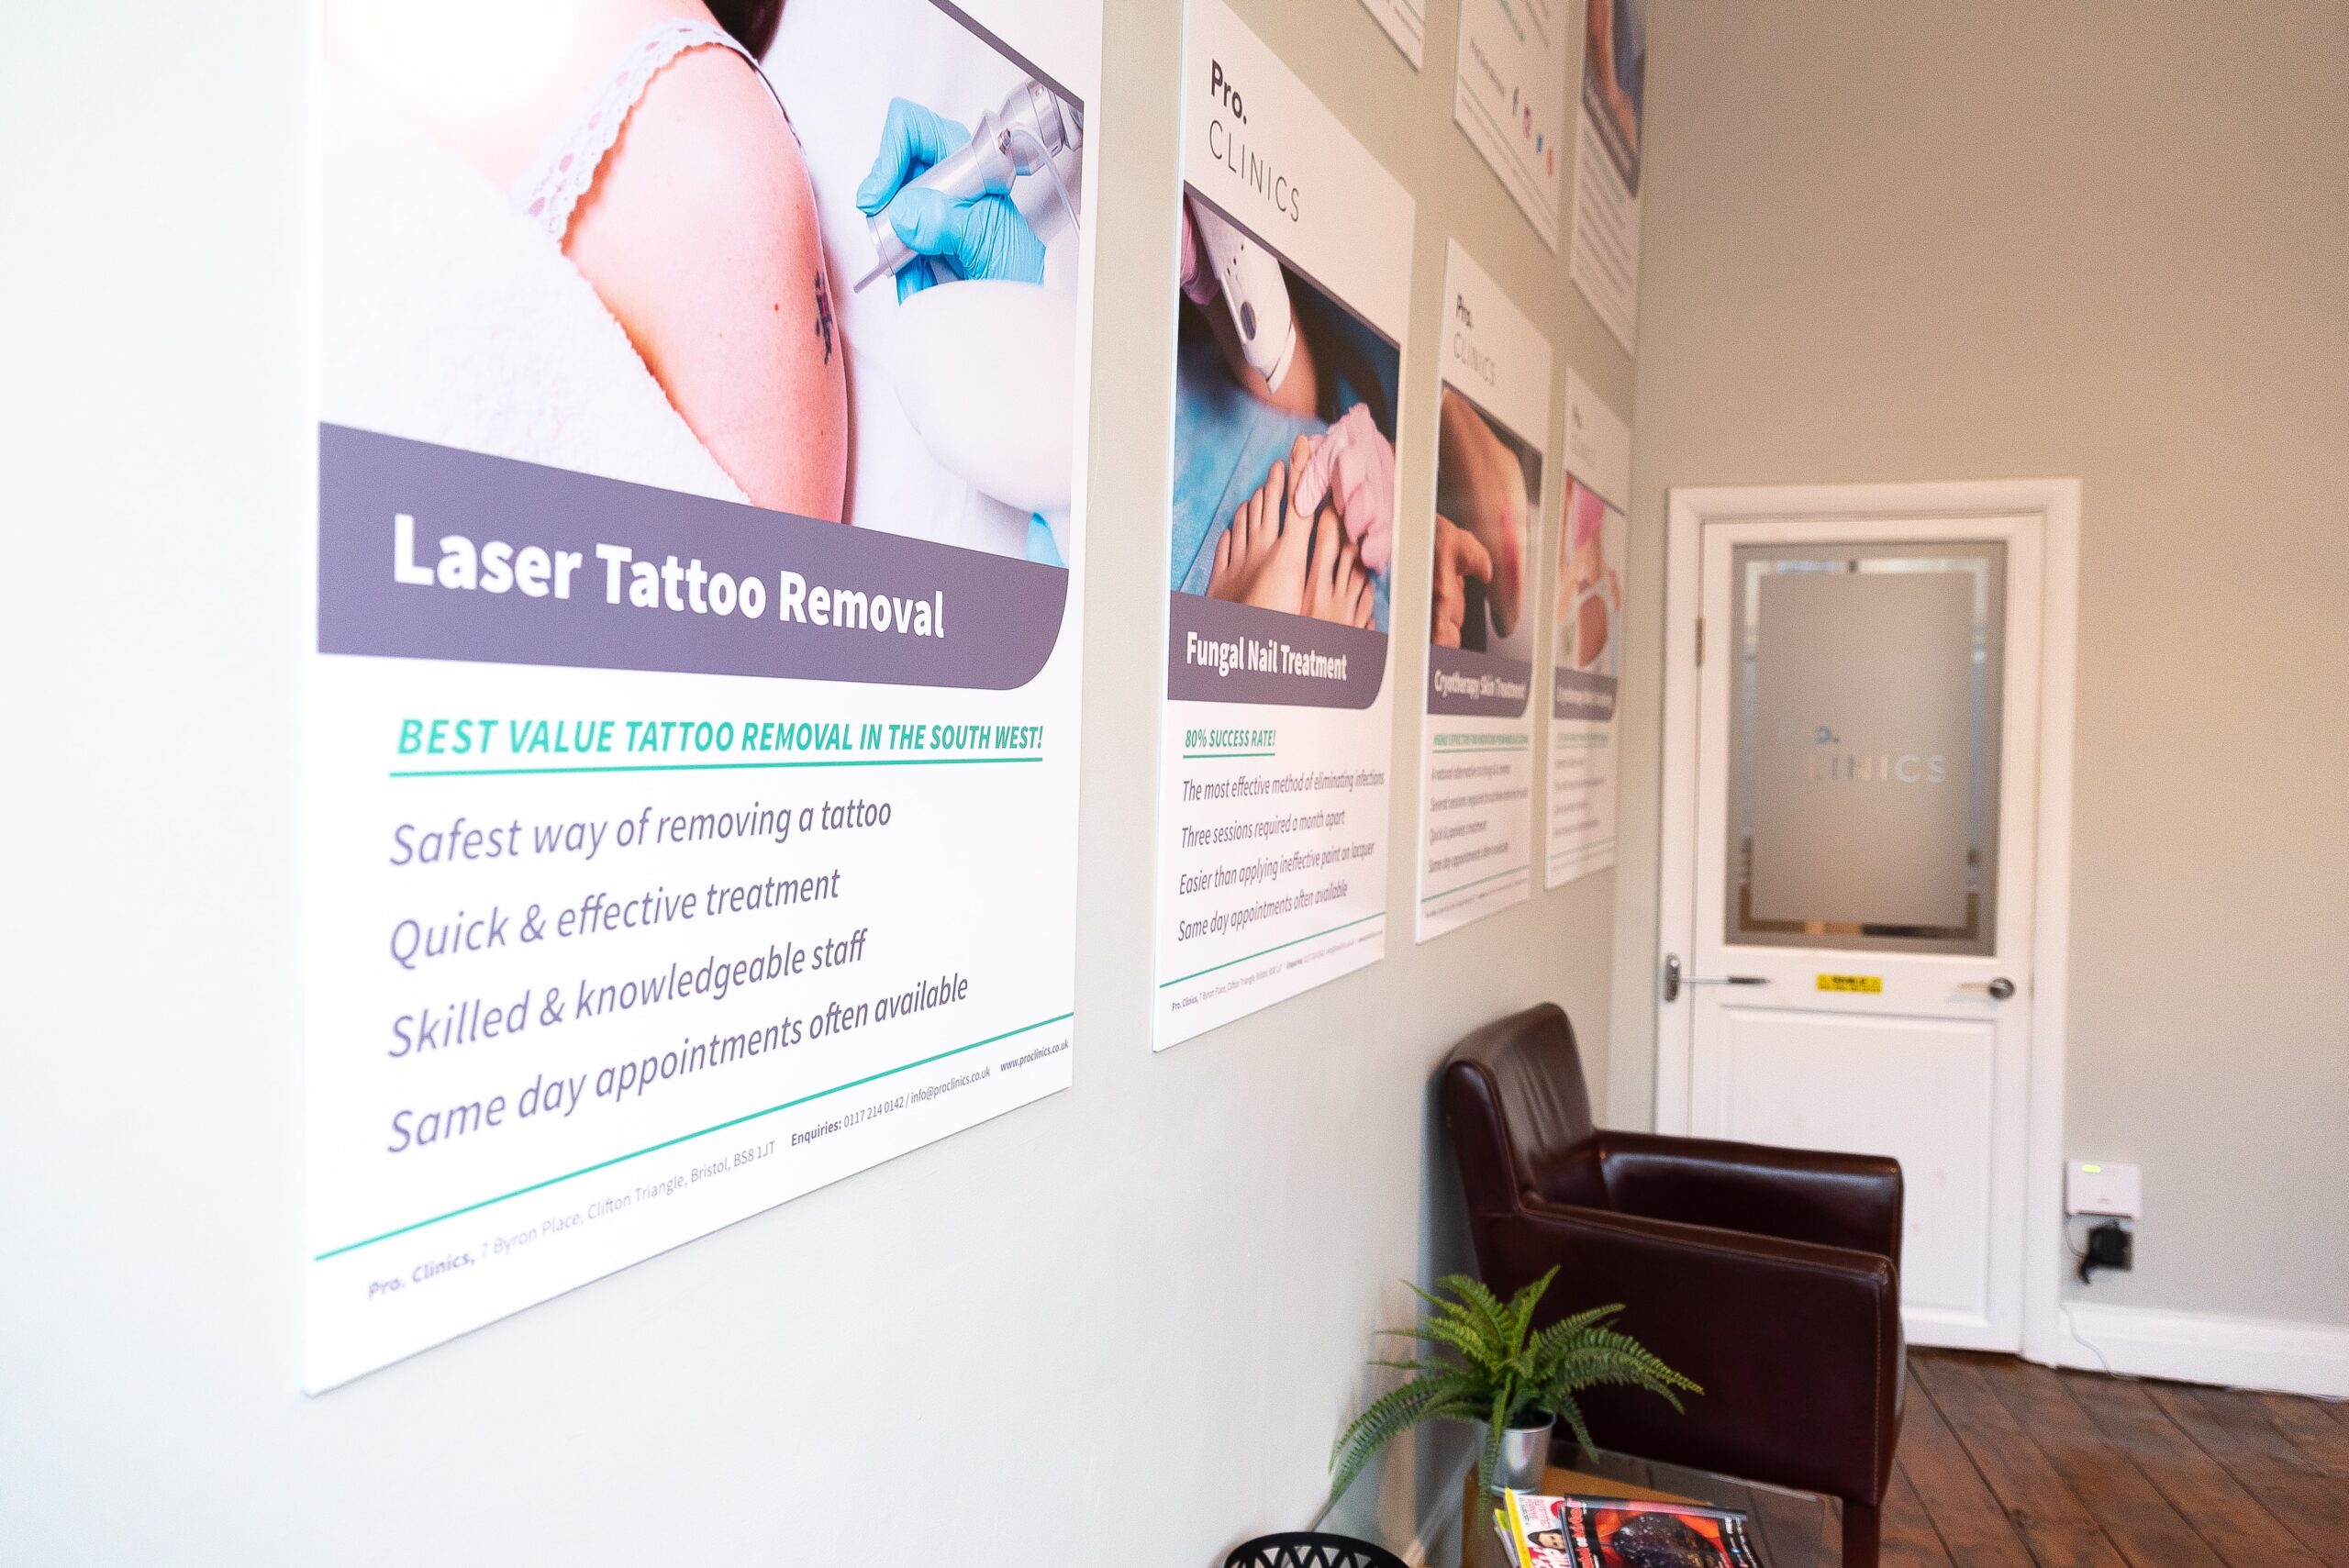 Laser Tattoo Removal - Giving people a fresh start